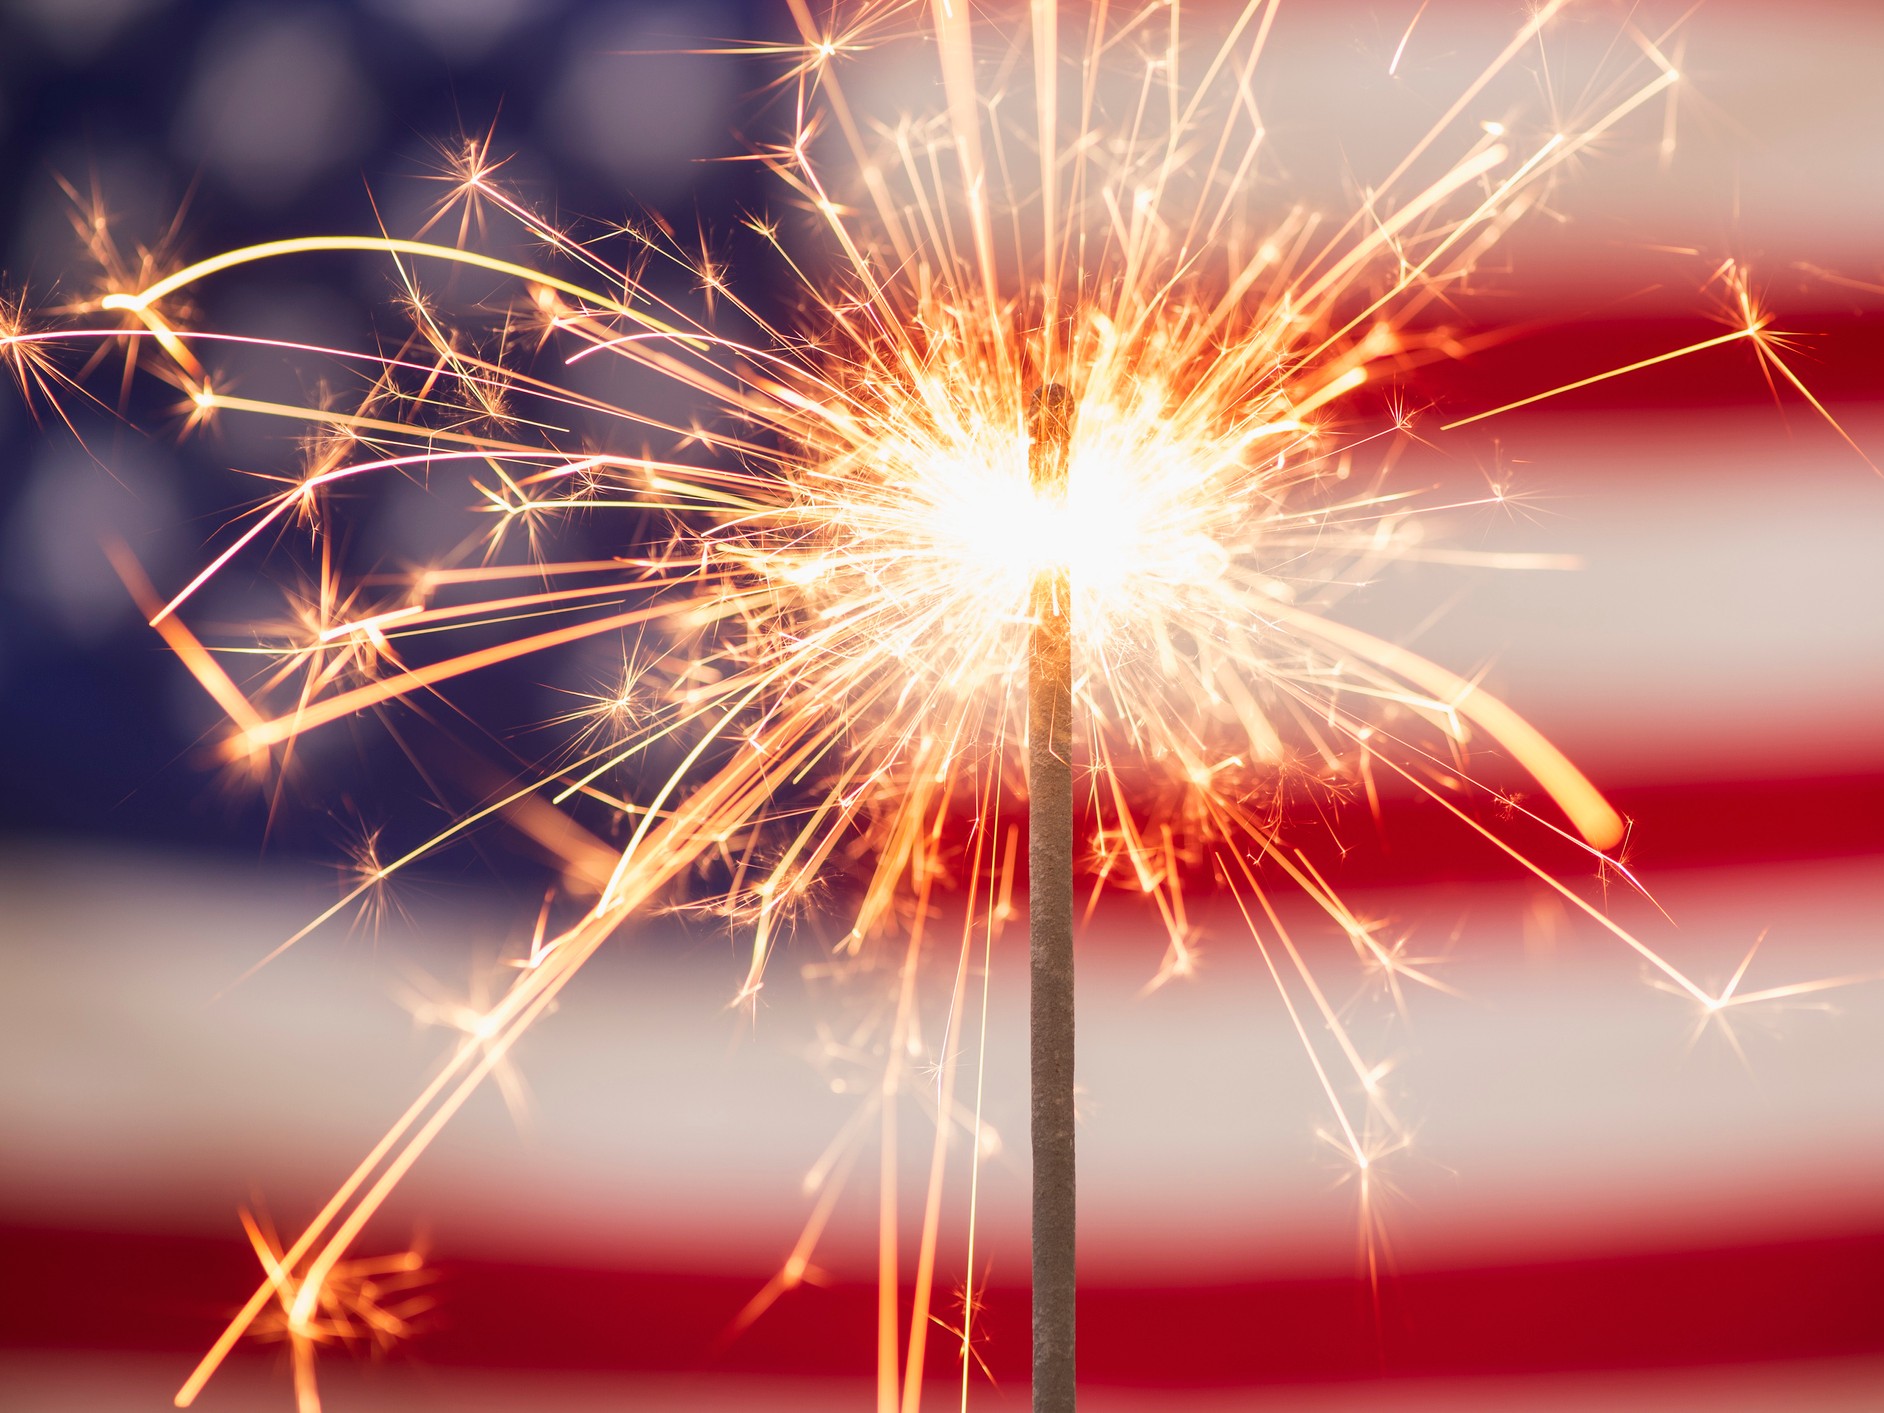 Independence Day shouldn't mean a trip to the Emergency Department